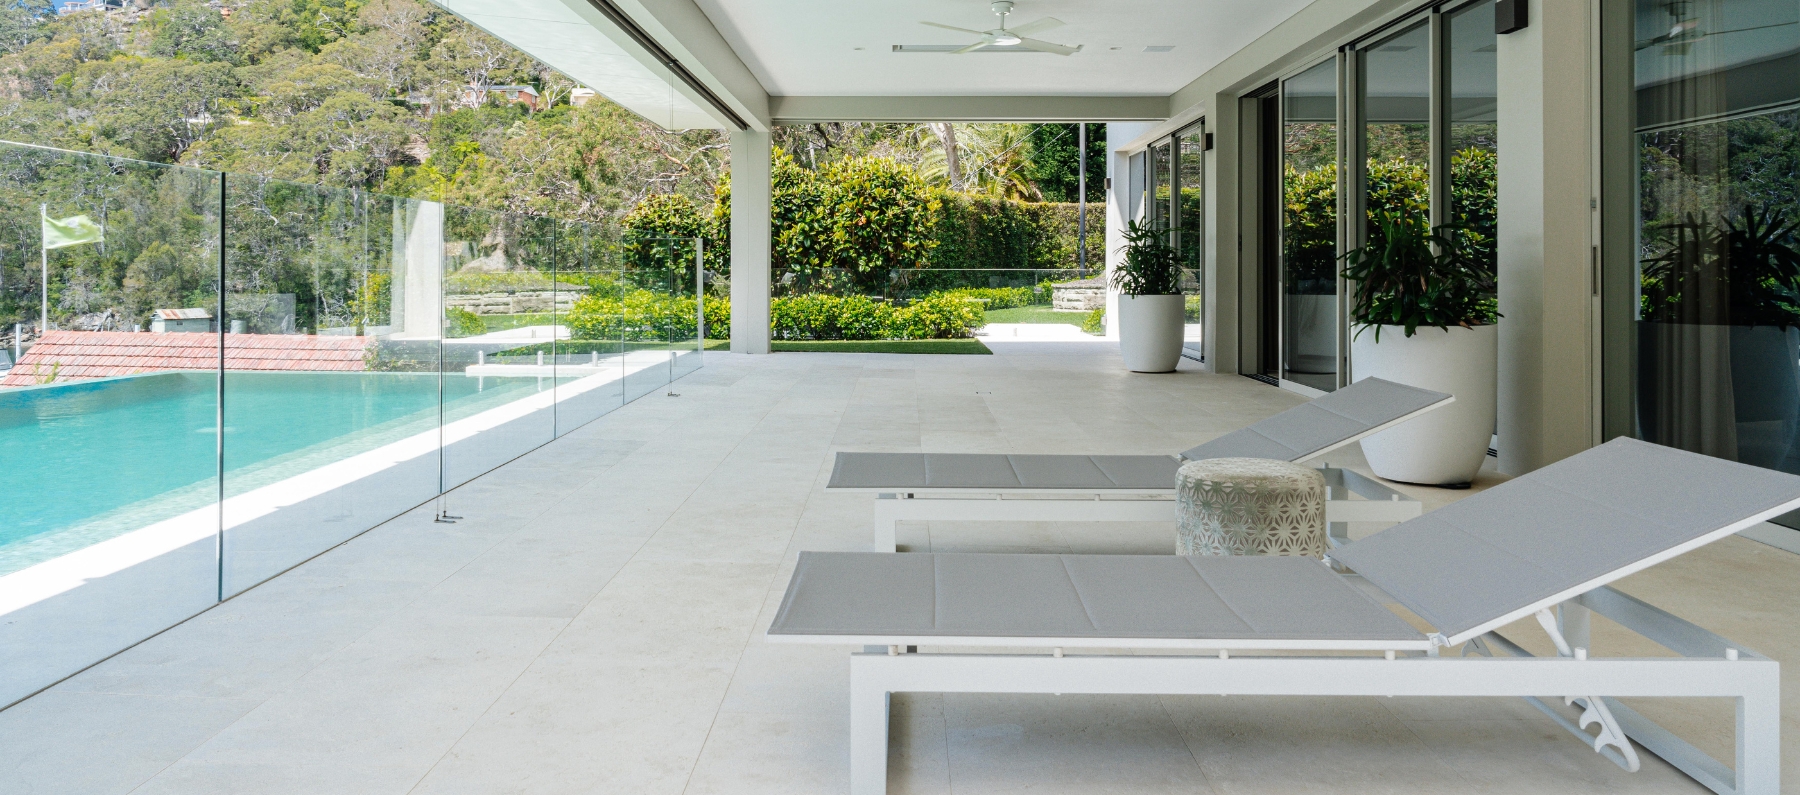 Roseville Chase Project_Crema Vialle Limestone_3 (1800x795)